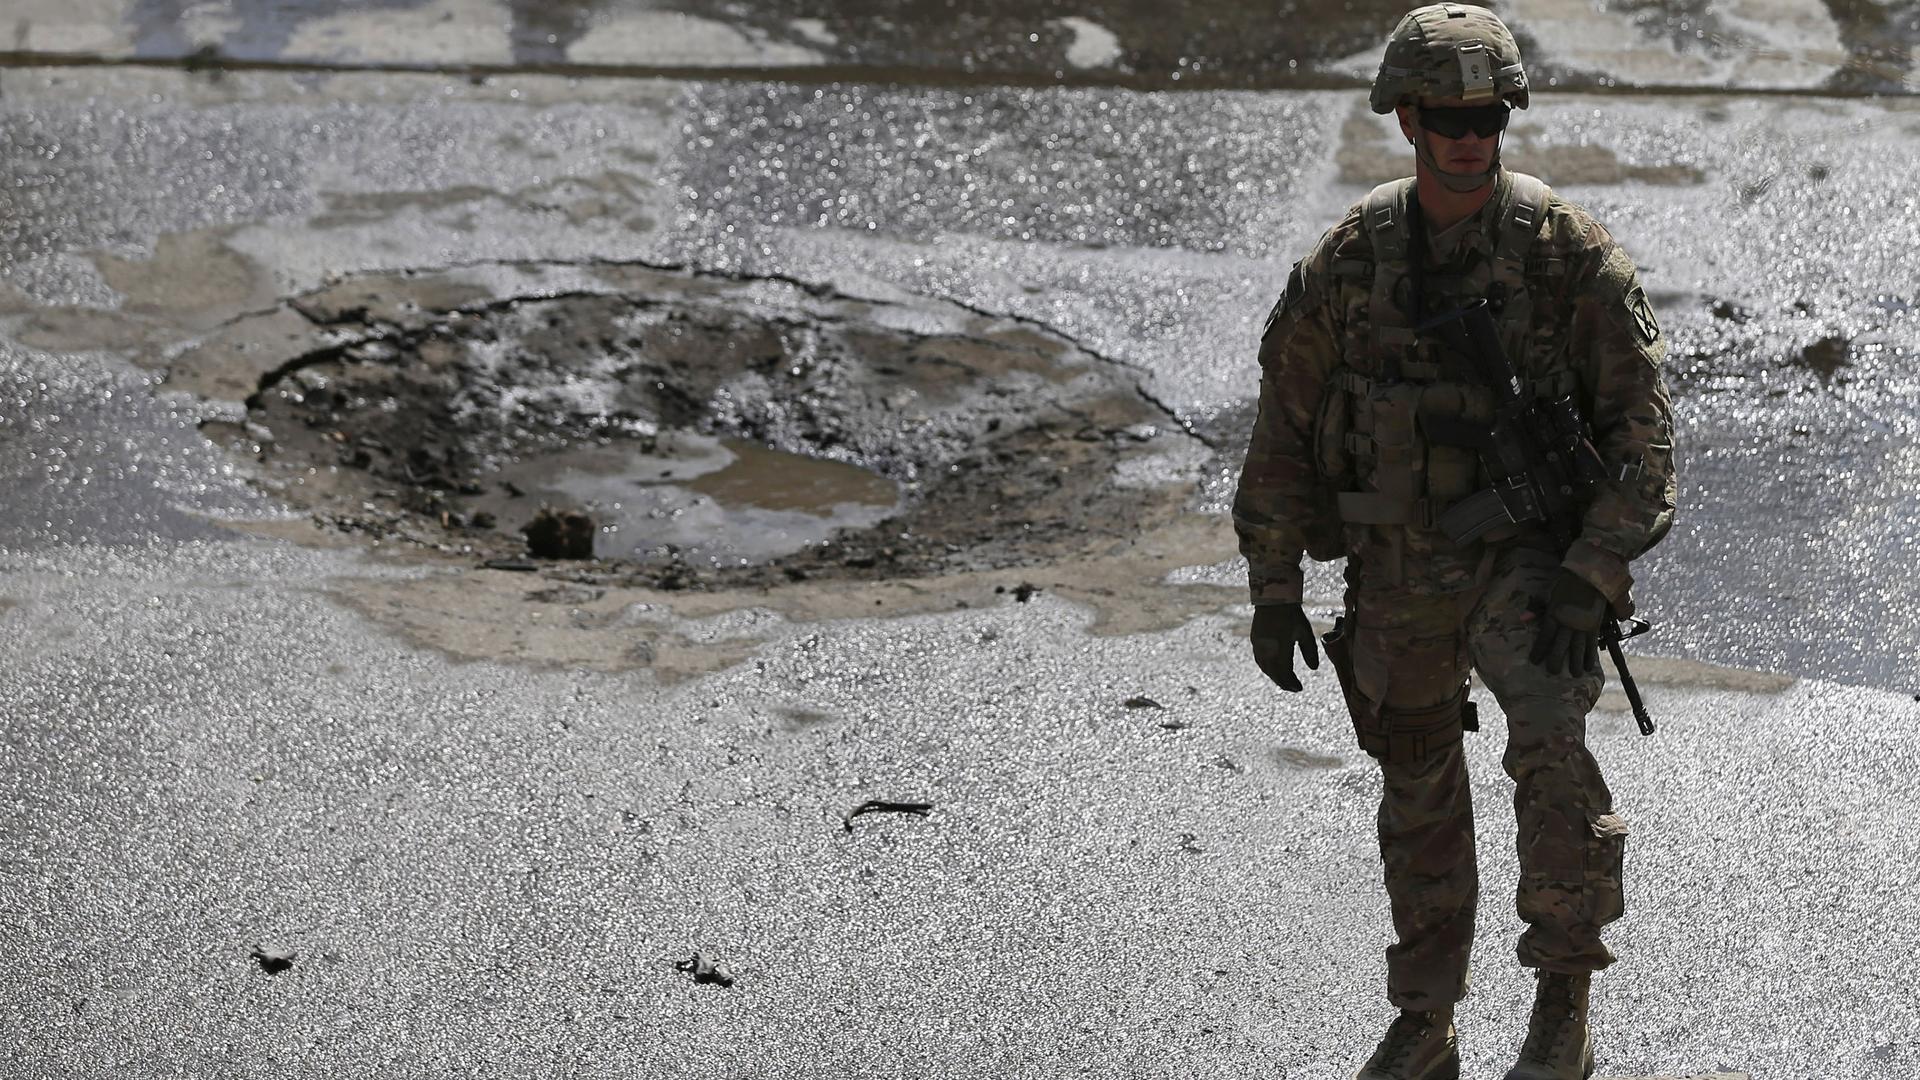 A NATO soldier stands at the site of a suicide car bomb blast in Kabul, on October 11th.  A suicide car bomber targeted a convoy of foreign troops in the Afghan capital during rush hour-traffic, flipping an armored vehicle on its side.  No fatalities were